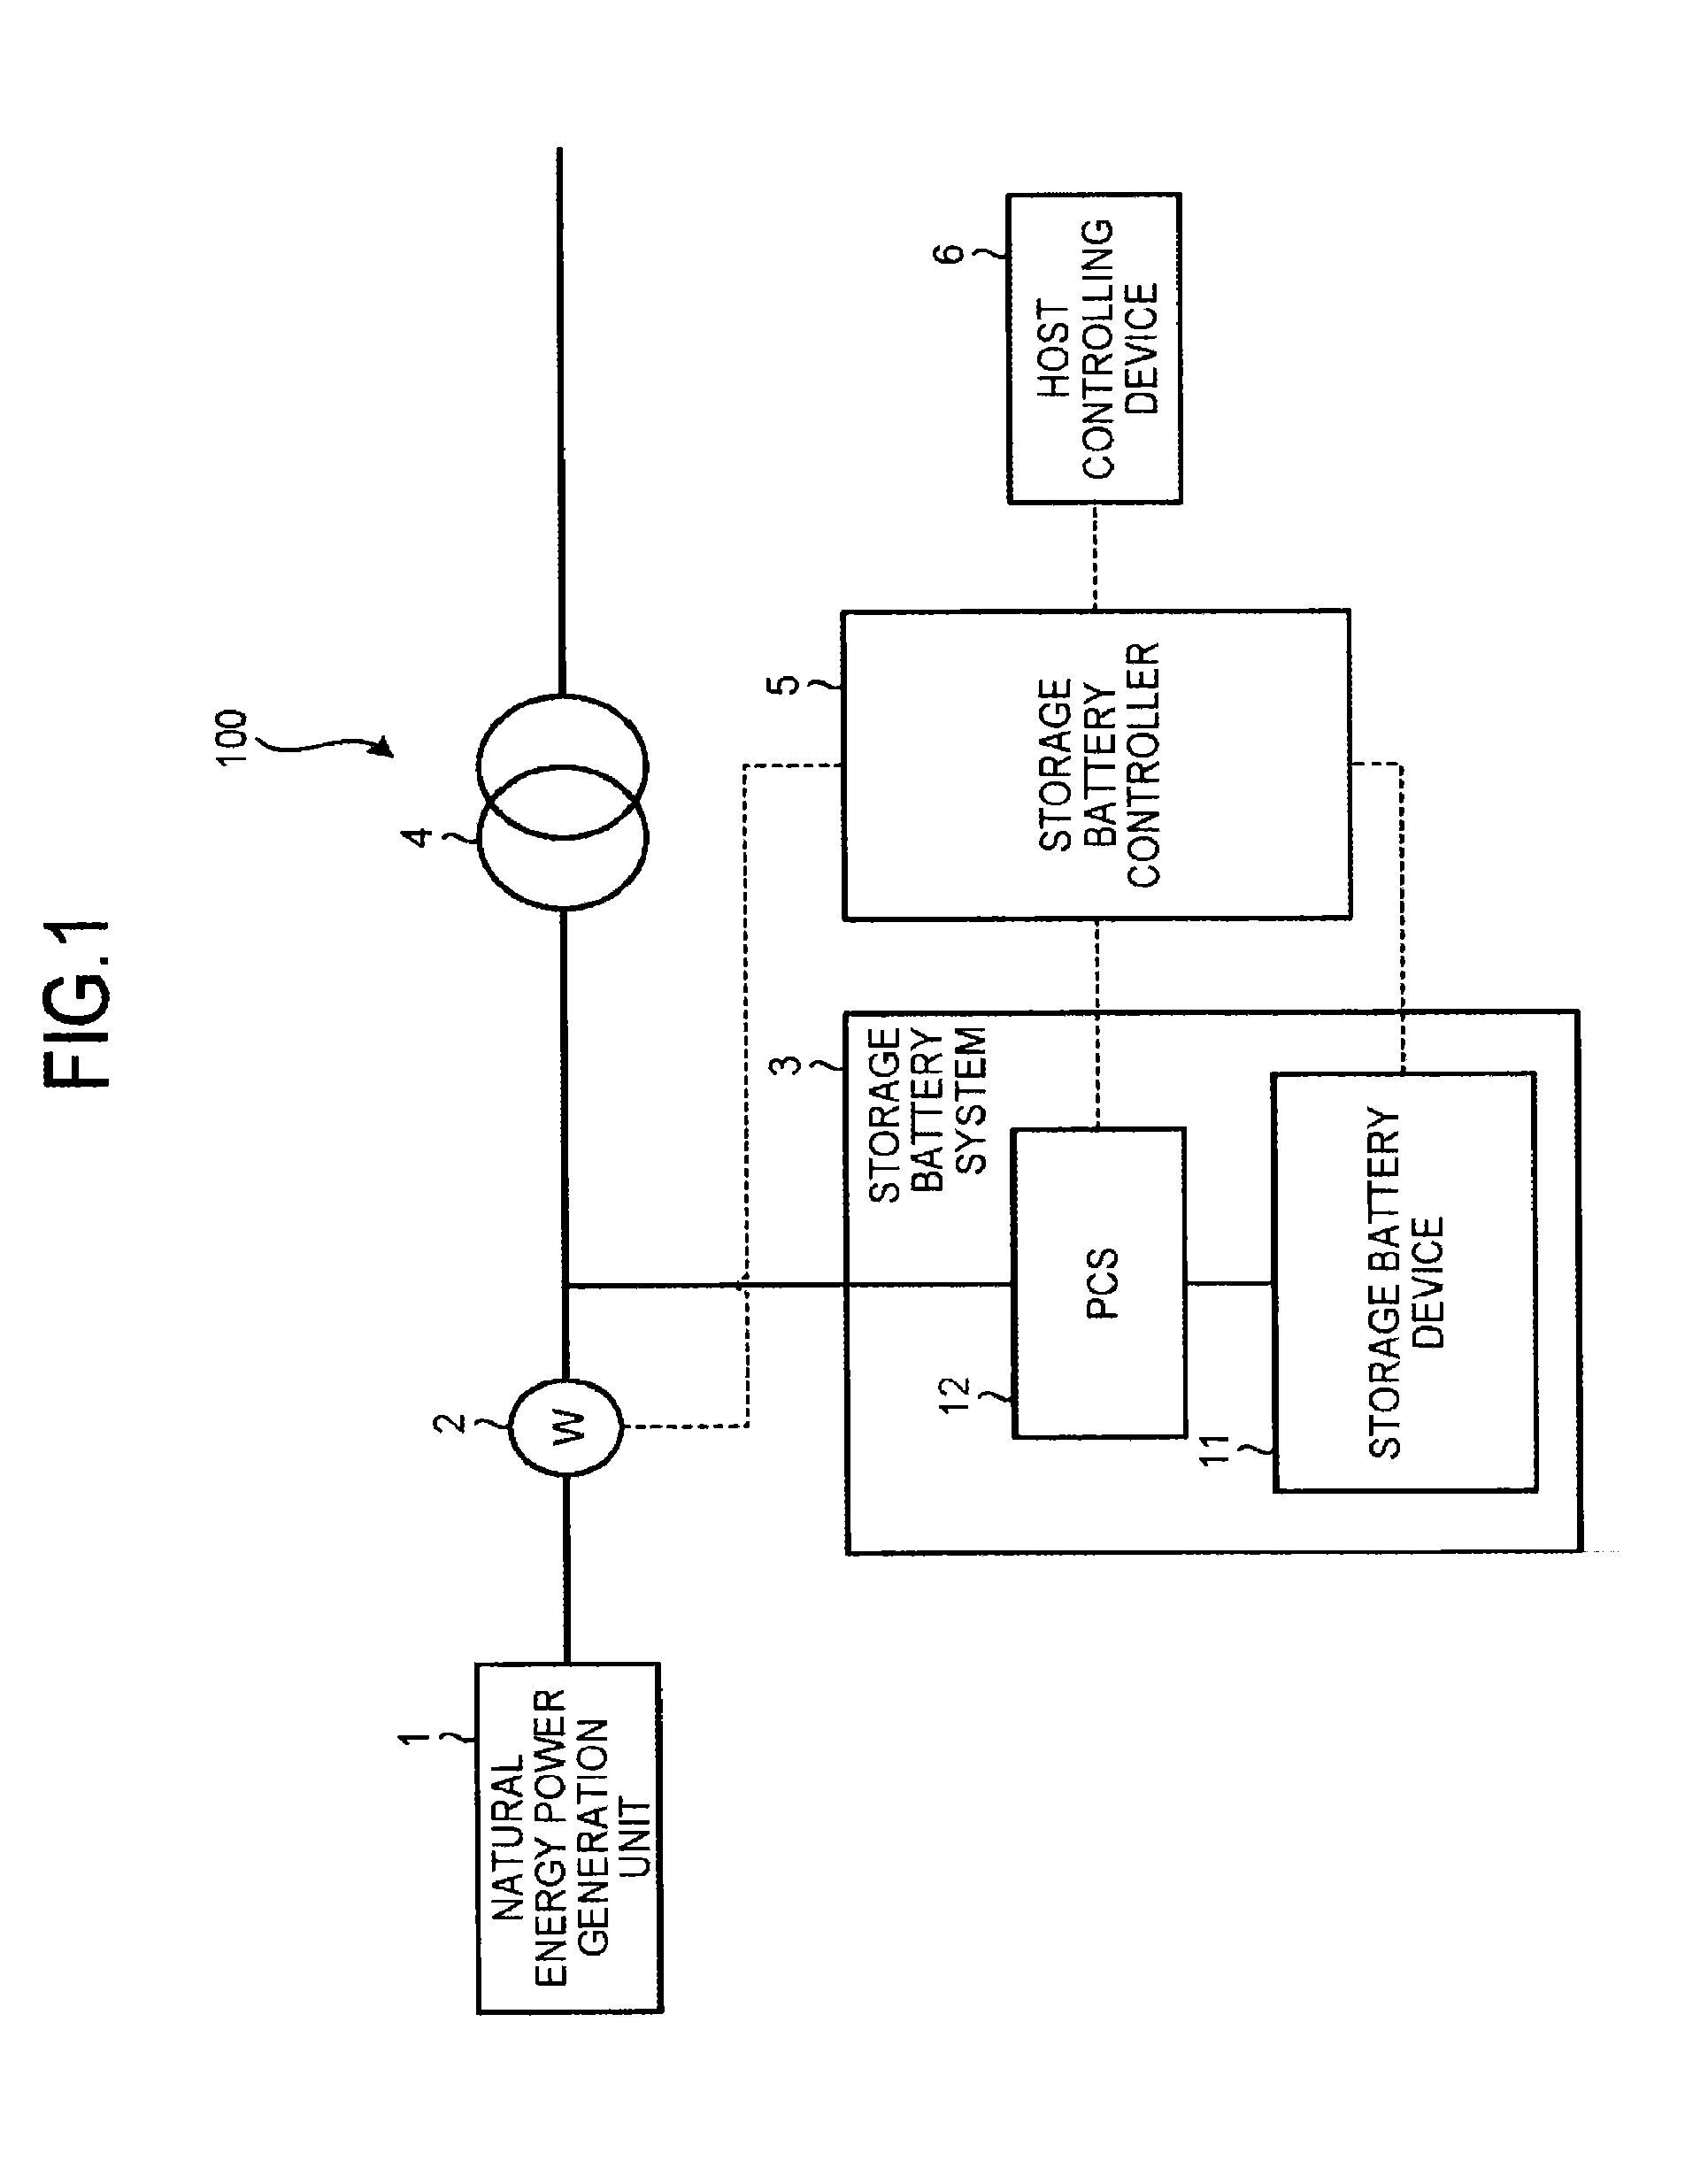 Storage battery management device, method, and computer program product